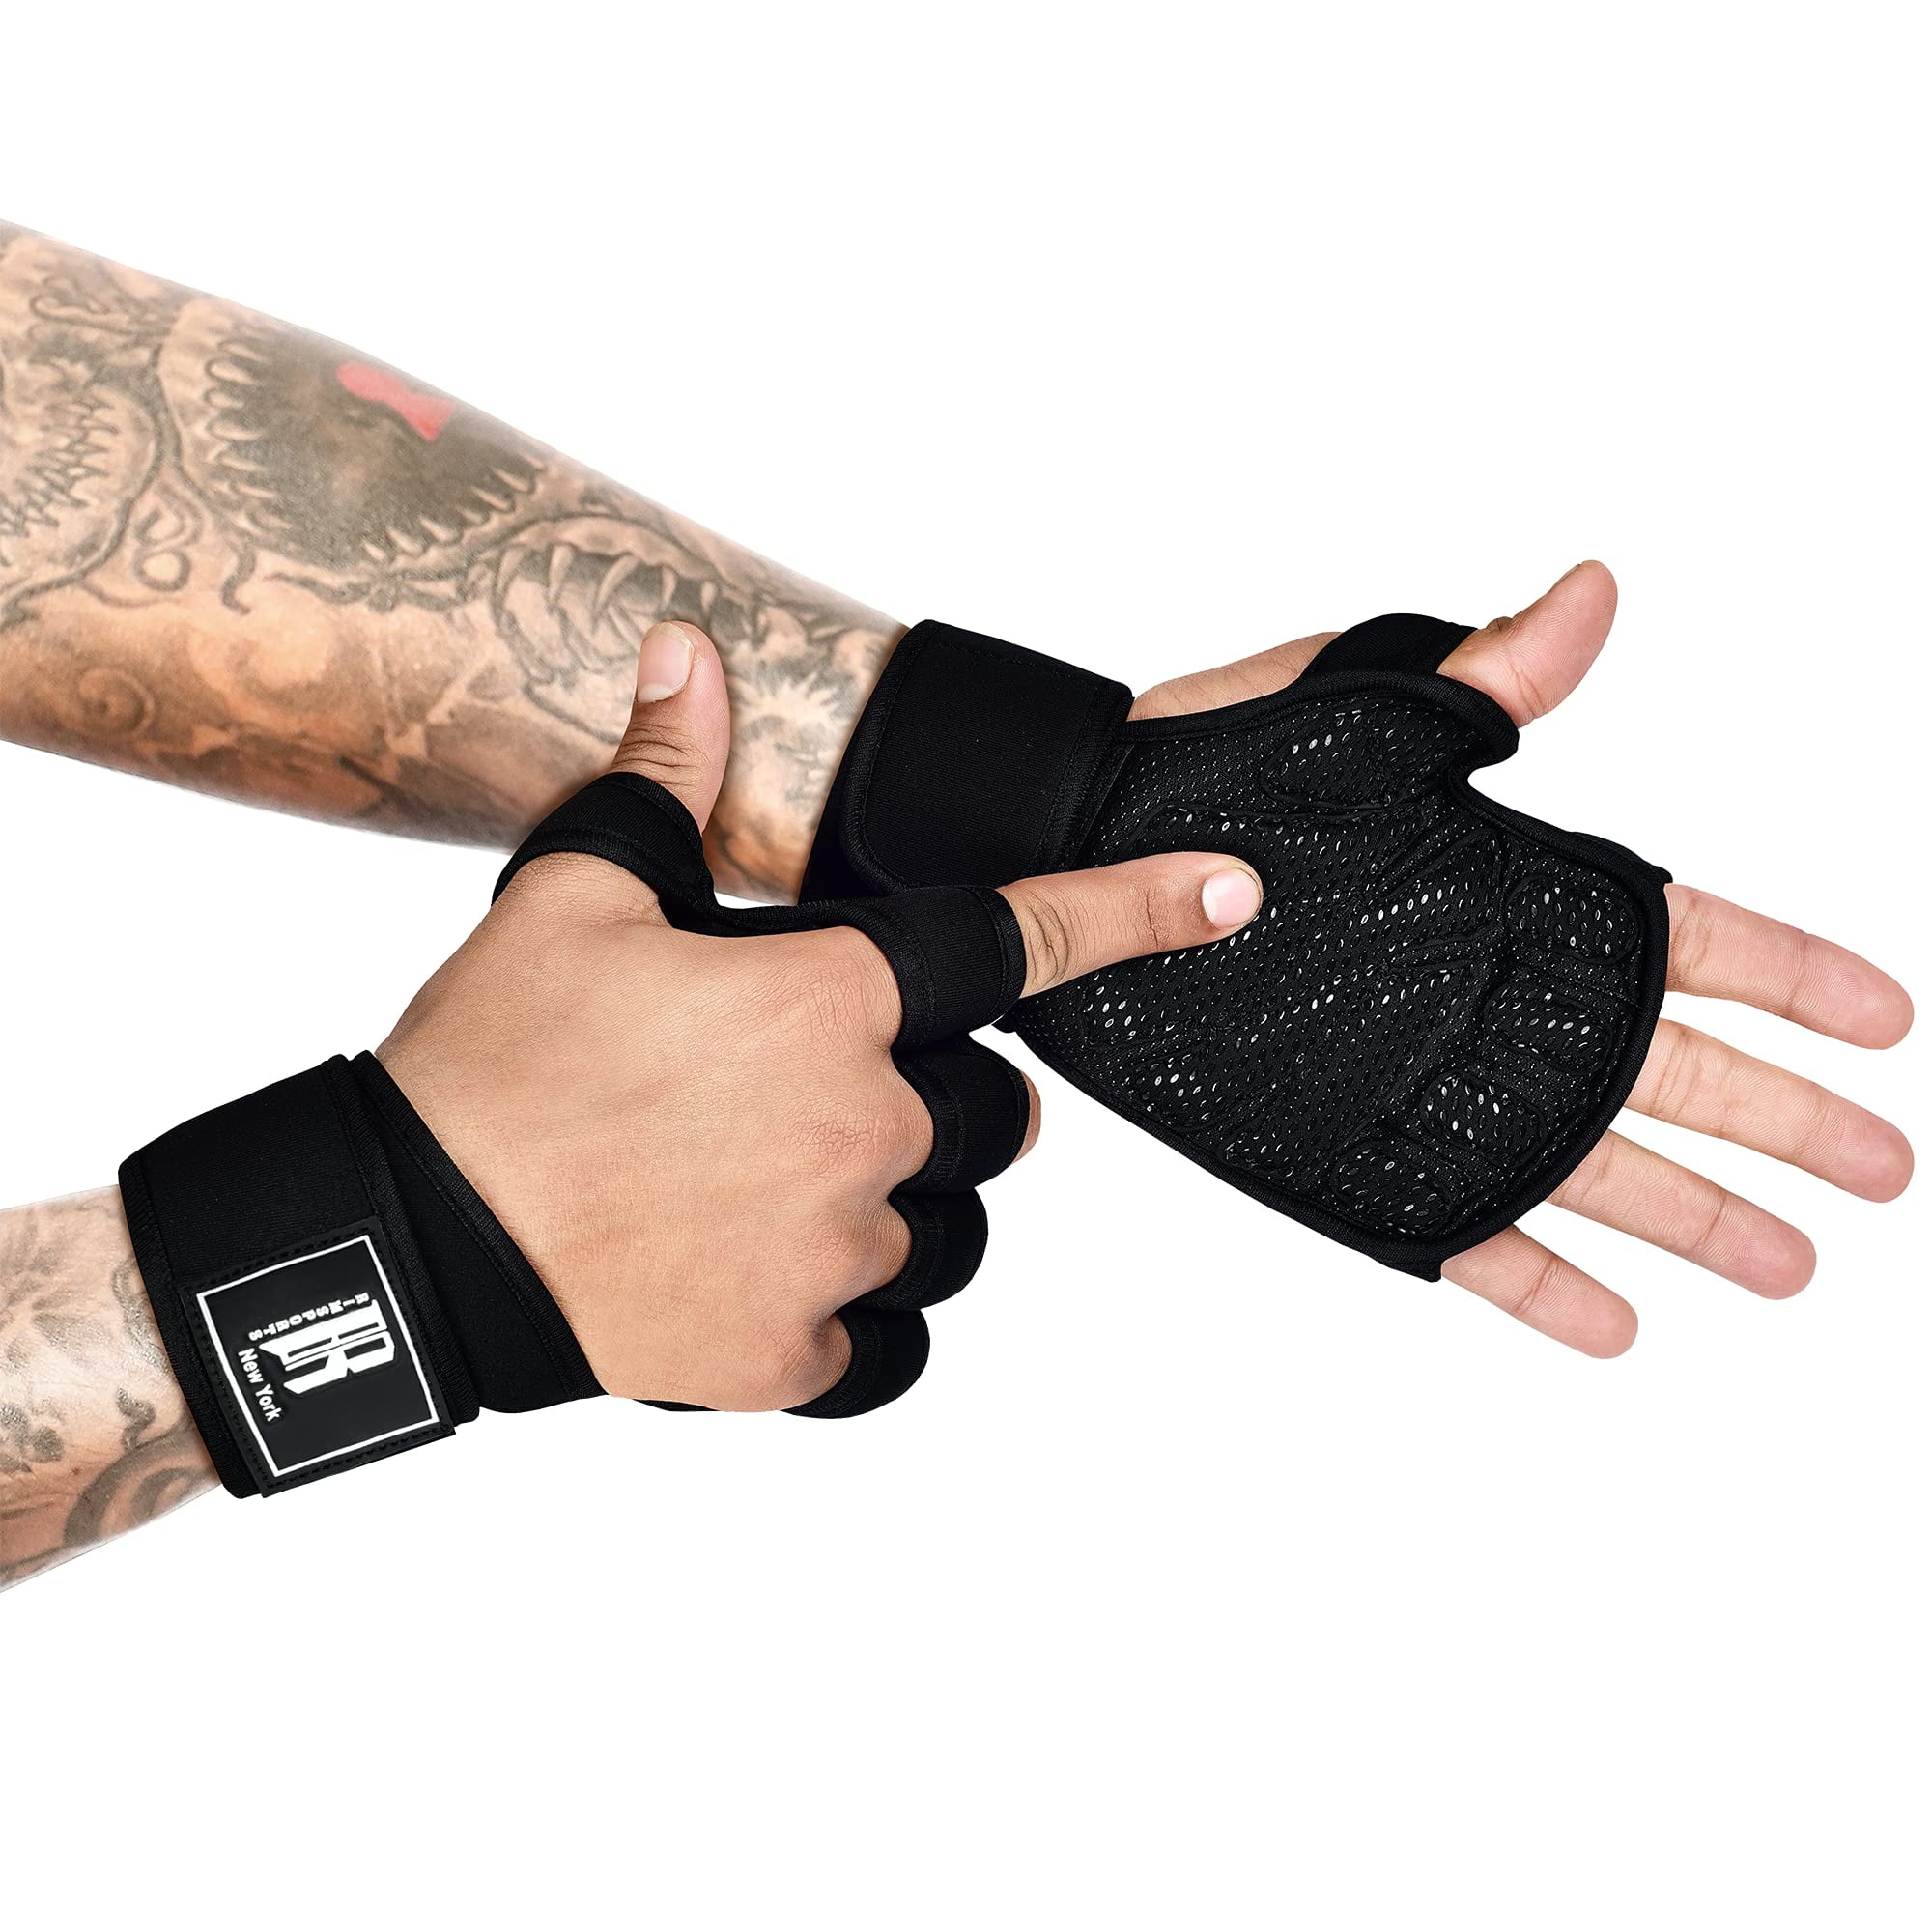 Details about   Mava Sports Ventilated Workout Gloves with Integrated Wrist Wraps Black 